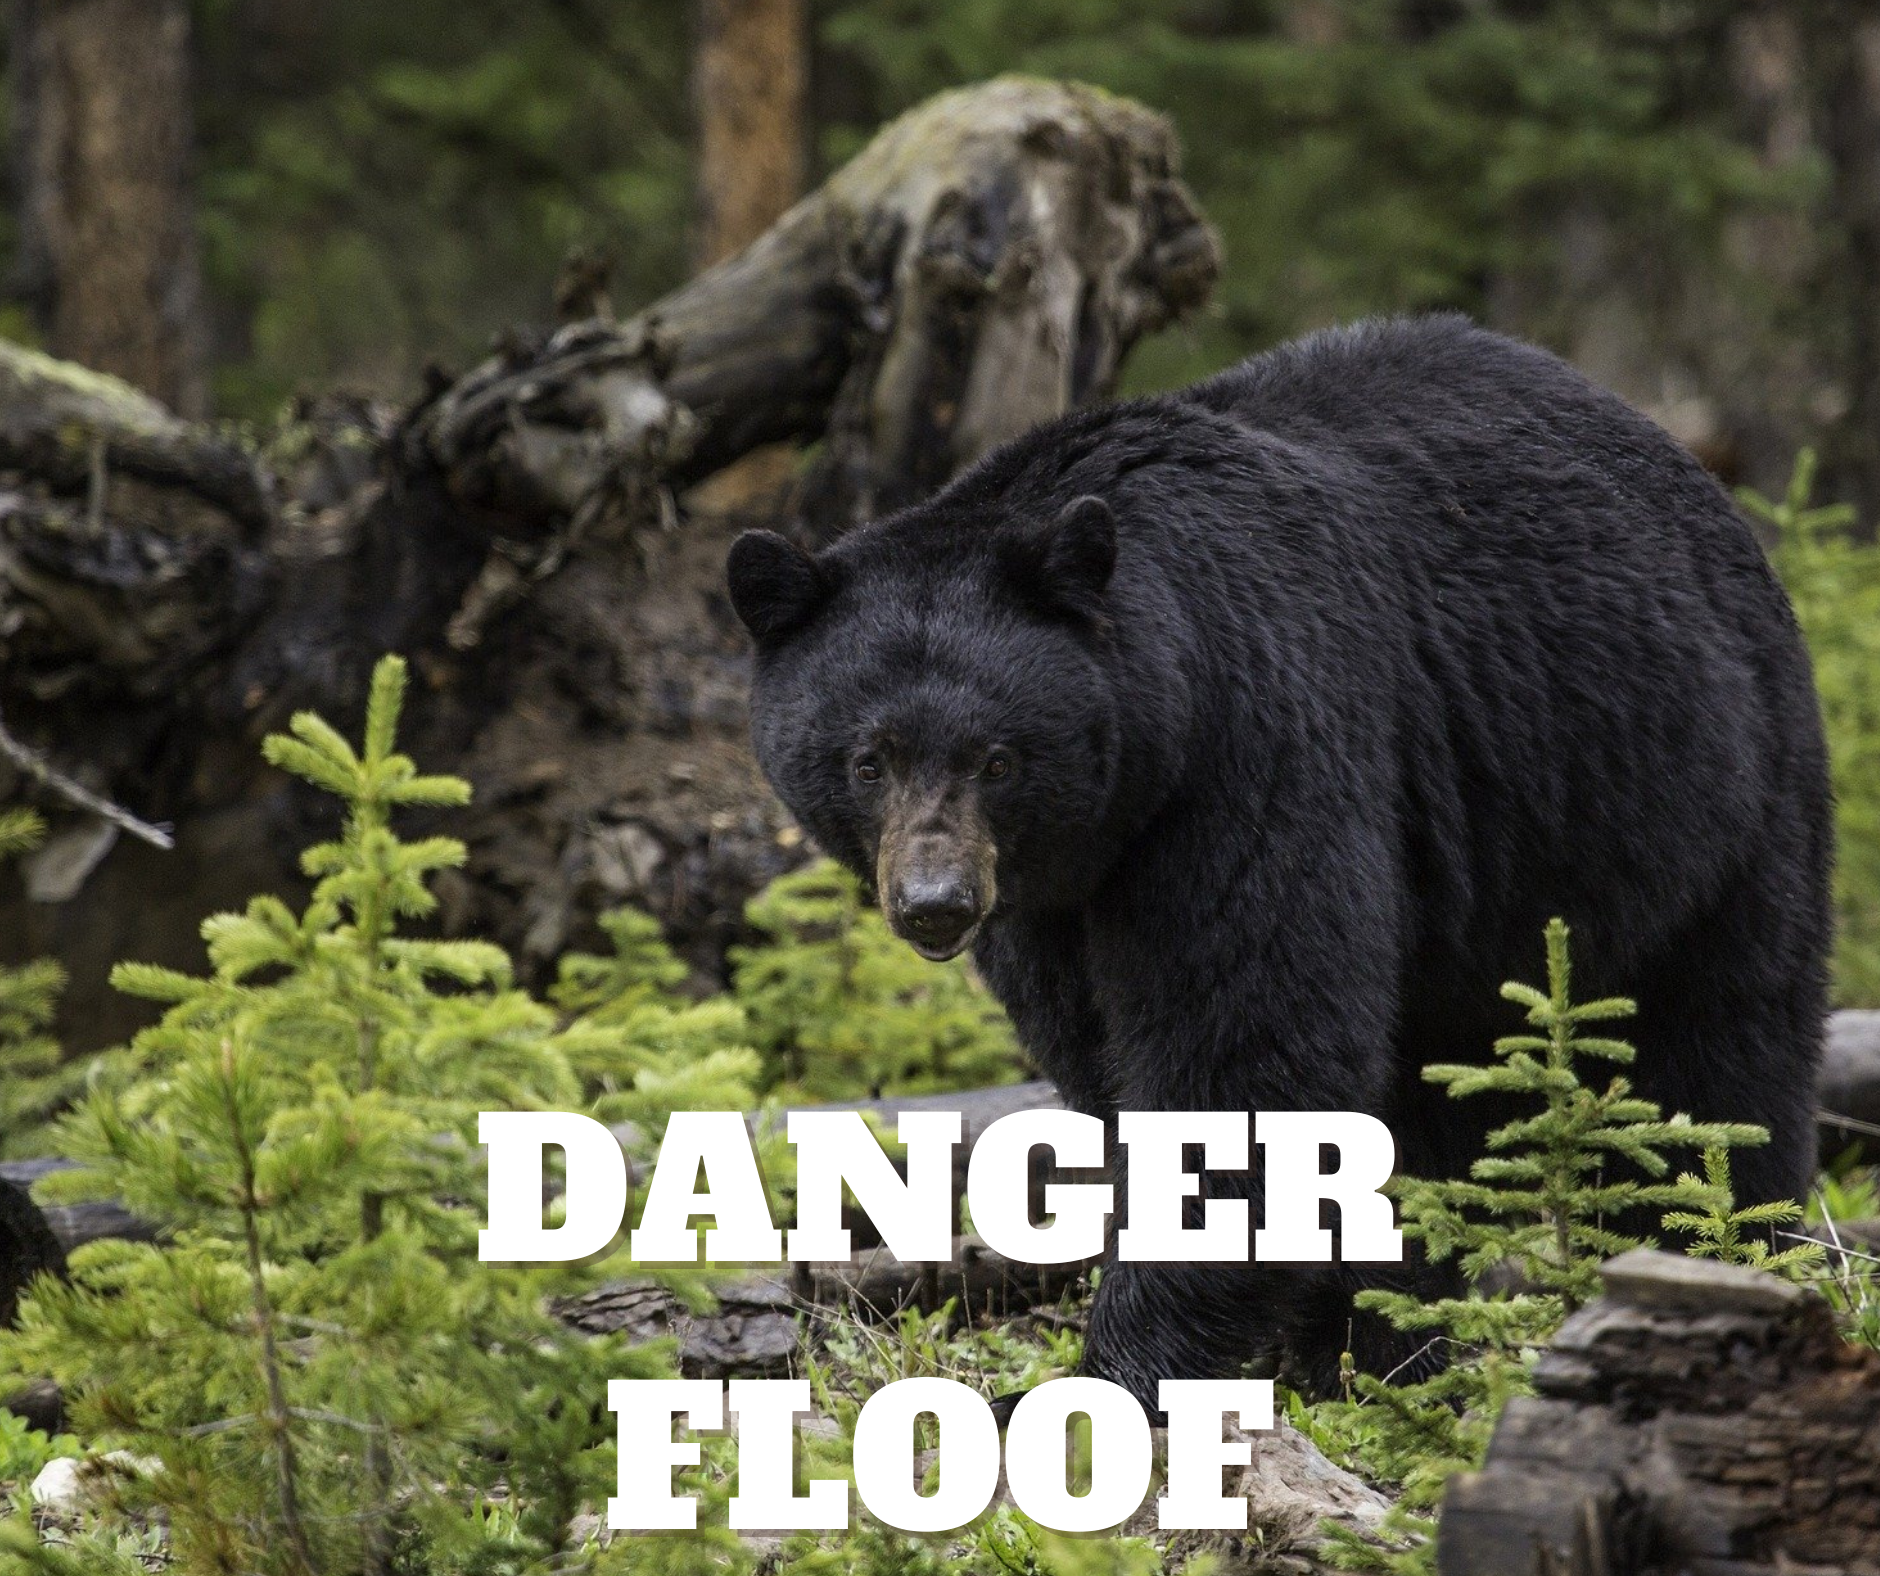 An image of a black bear with white text, "Danger floof" below